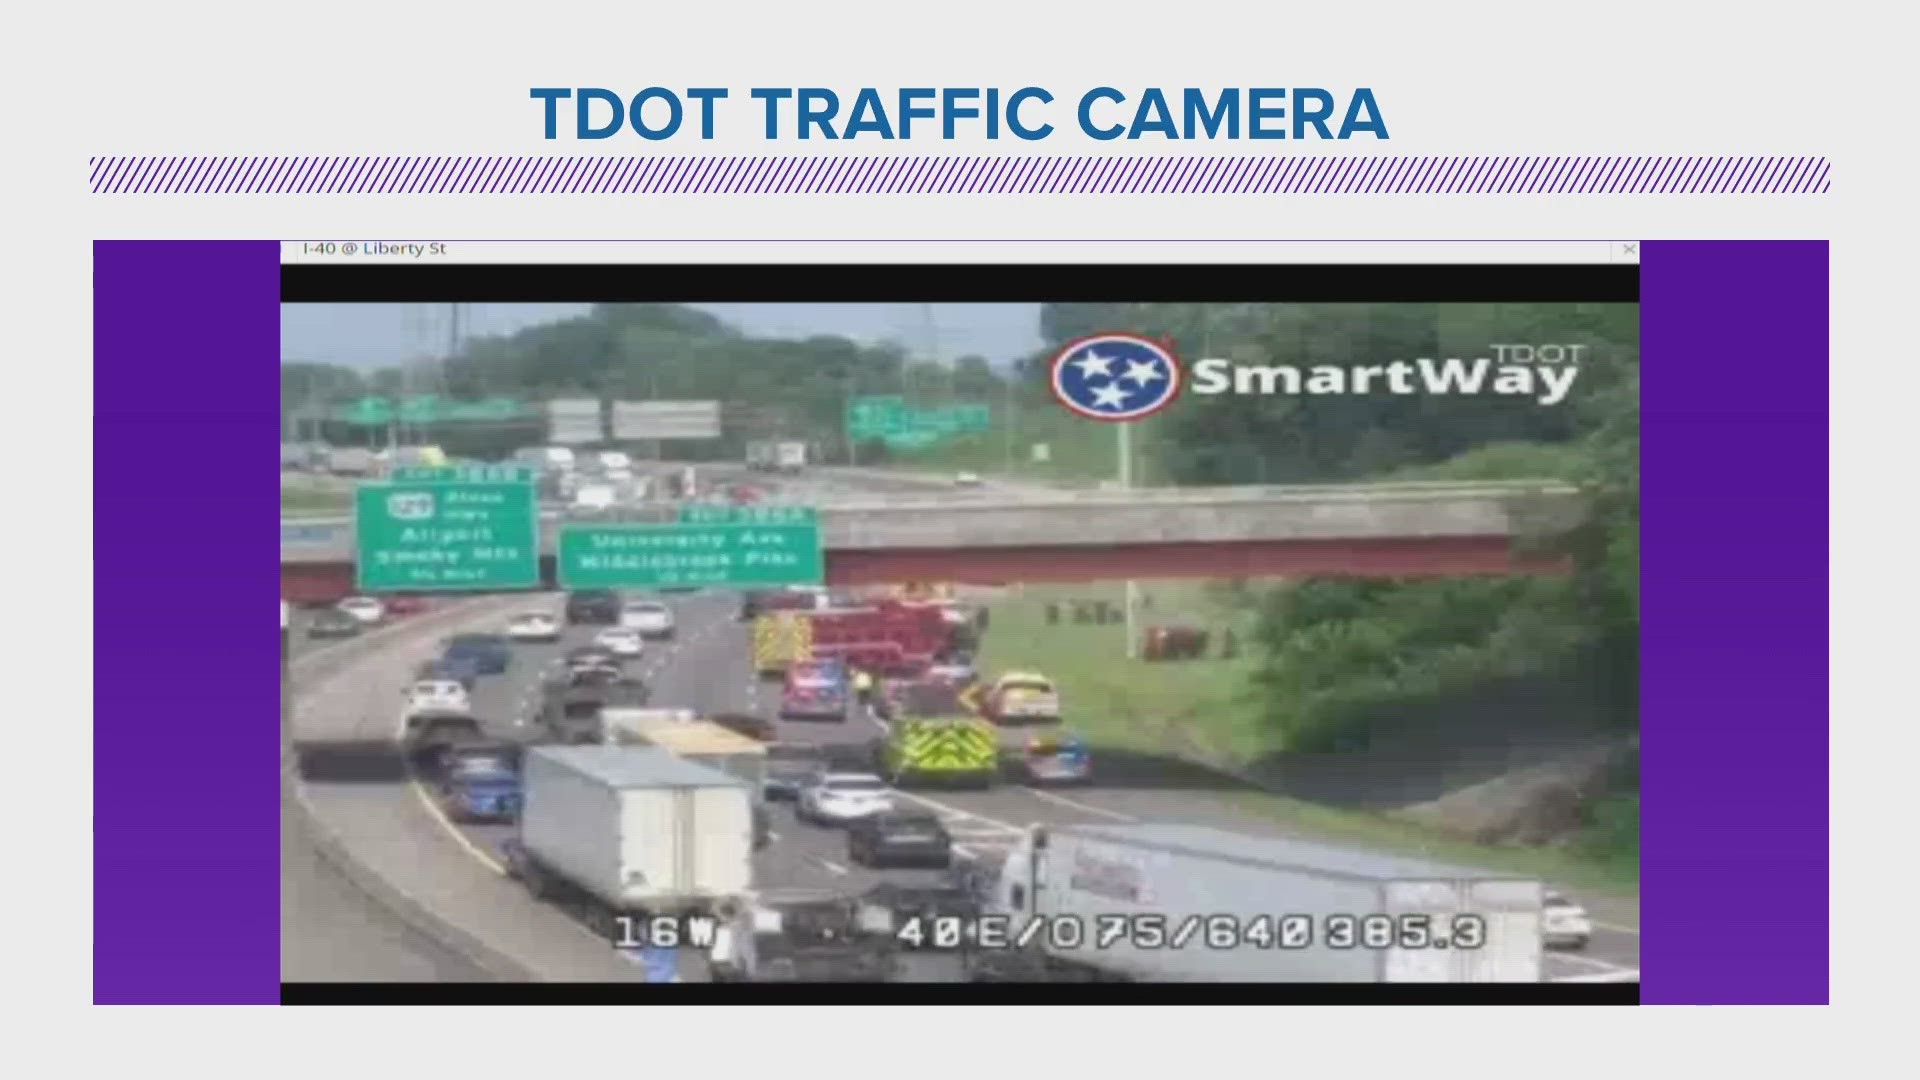 The right lane and right shoulder of I-40 East under the Liberty Street bridge are blocked due to a wreck.